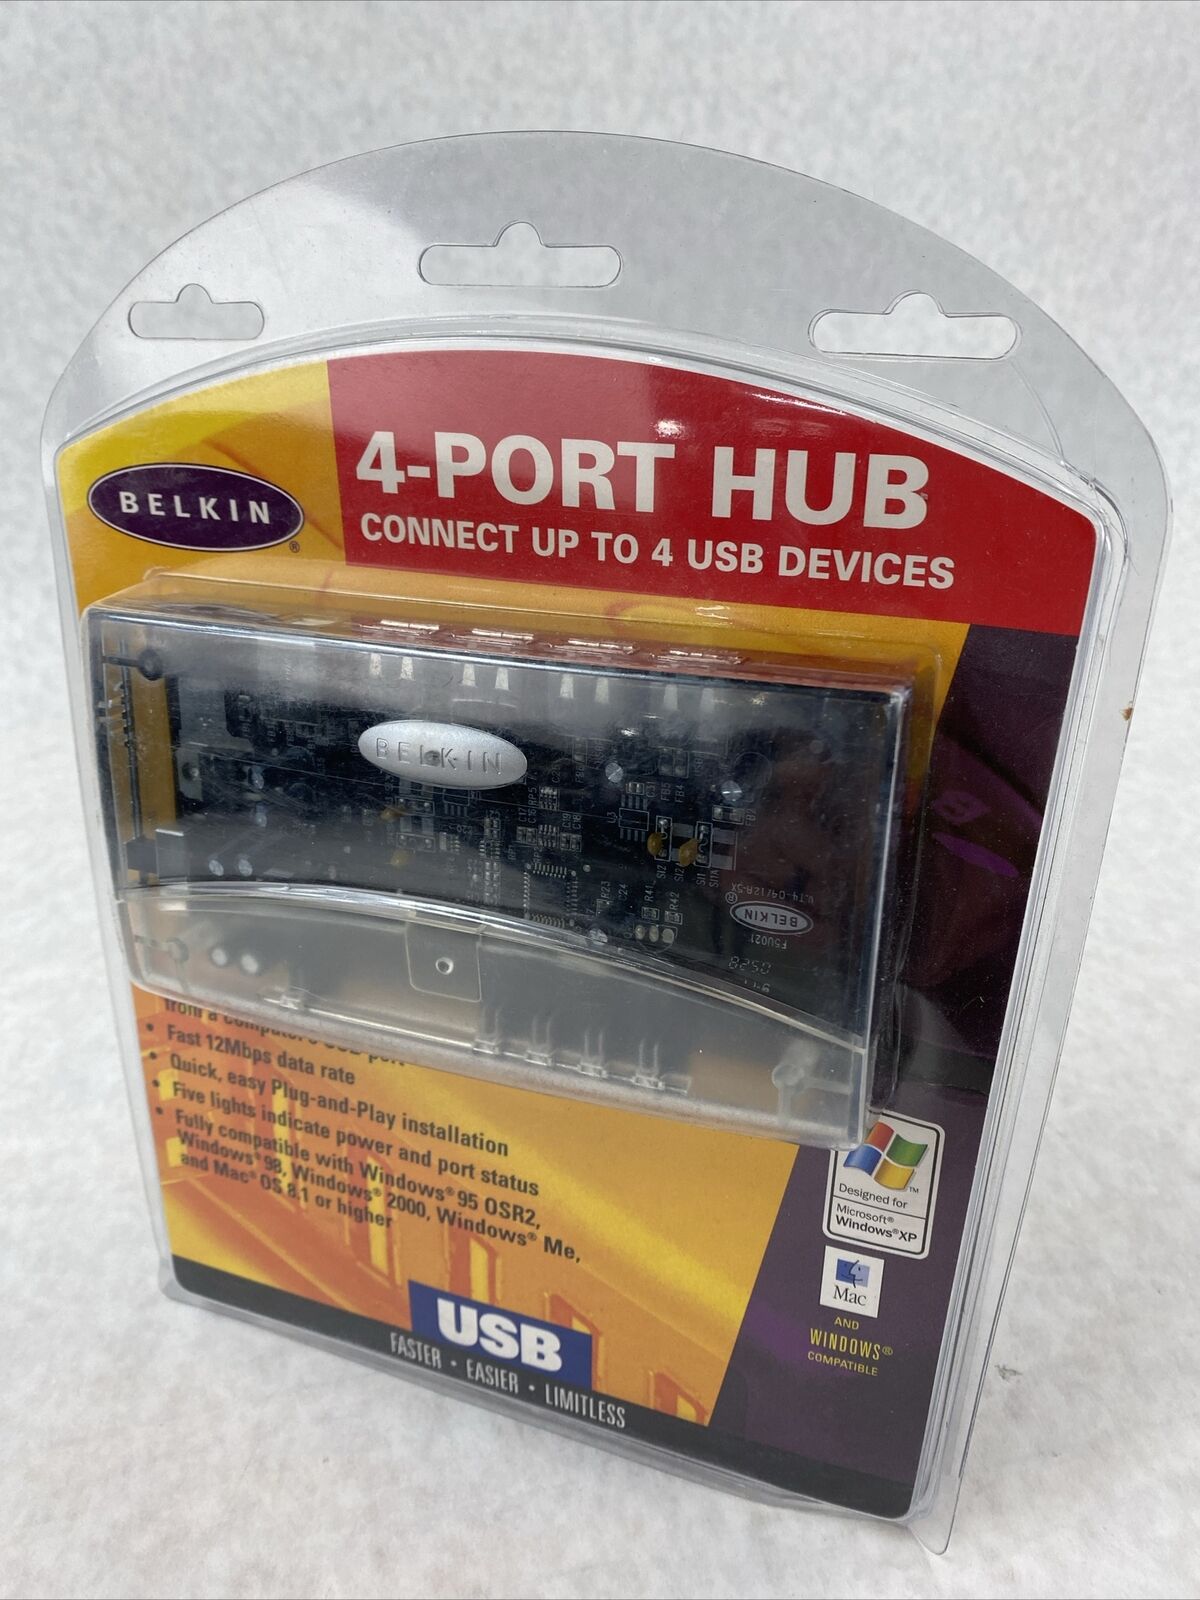 Belkin 4-Port Hub 4 USB Devices From Computer Fast 12MBPS SEALED